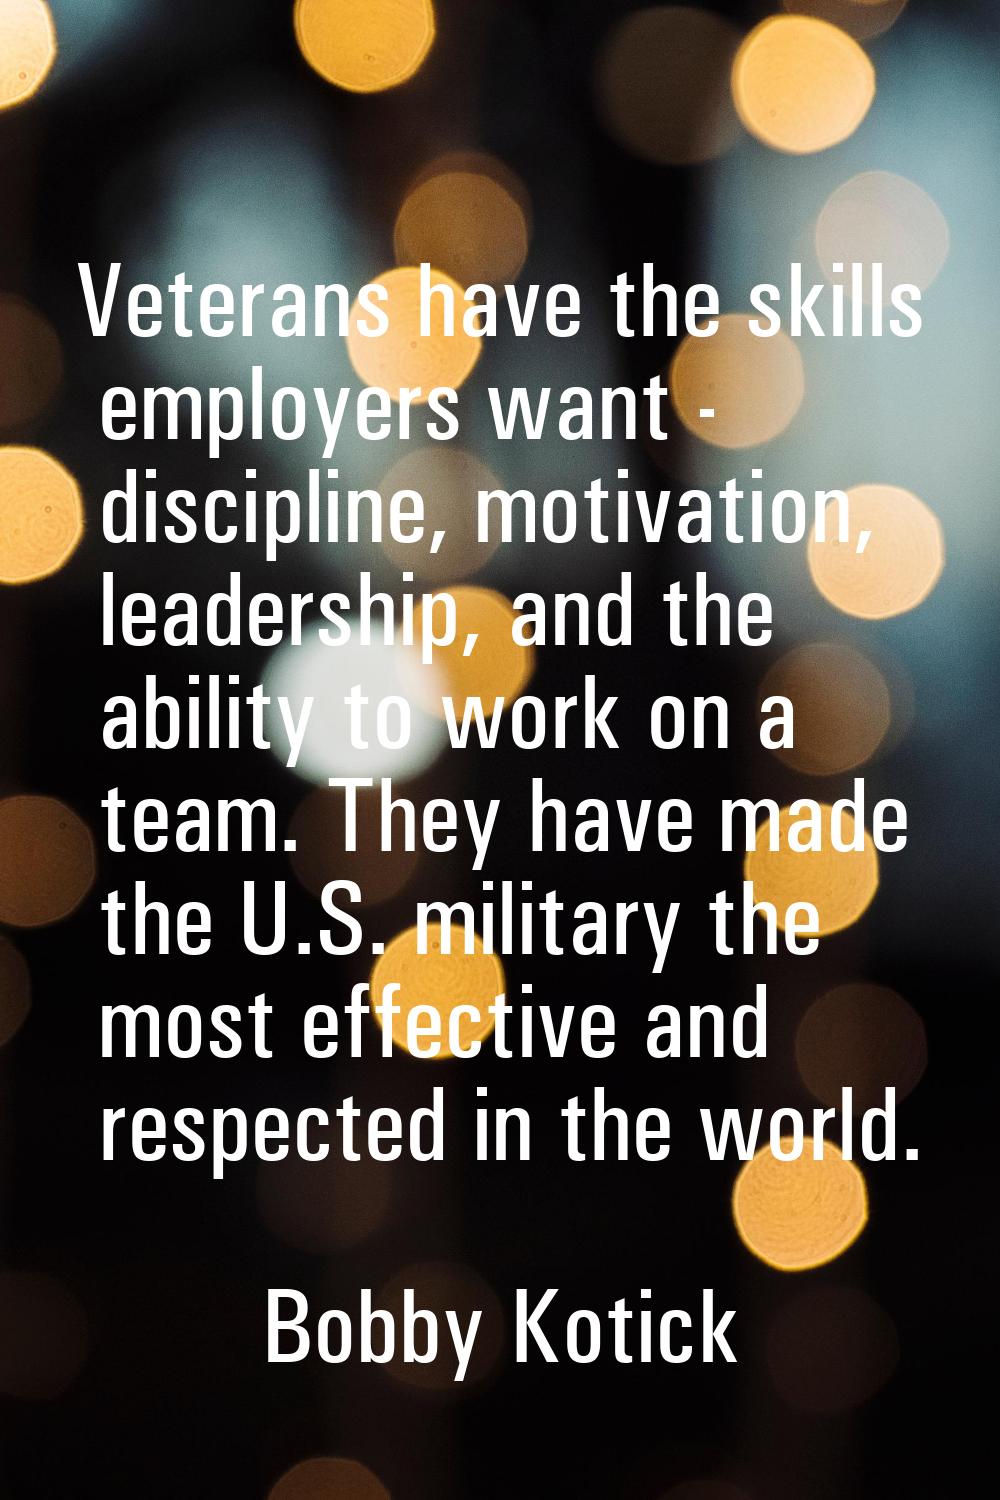 Veterans have the skills employers want - discipline, motivation, leadership, and the ability to wo